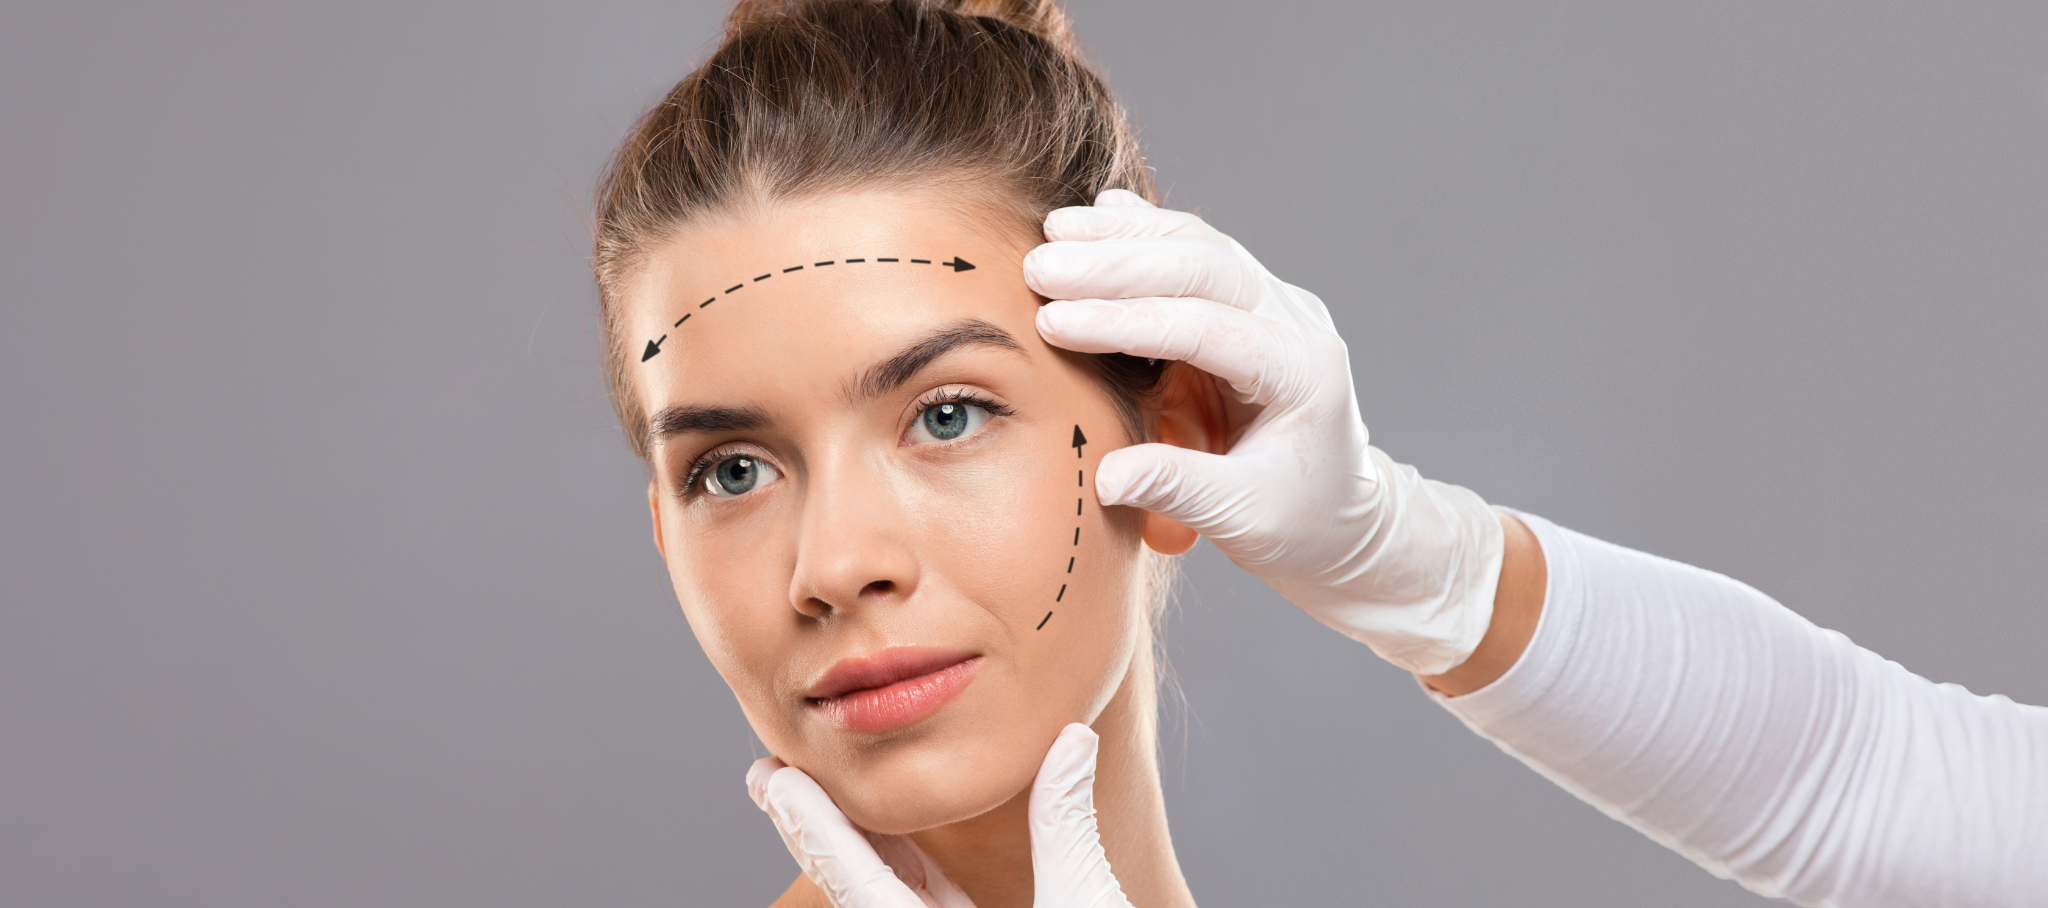 Avaya Aesthetics | Understanding the Benefits of Non-Surgical Facelifts